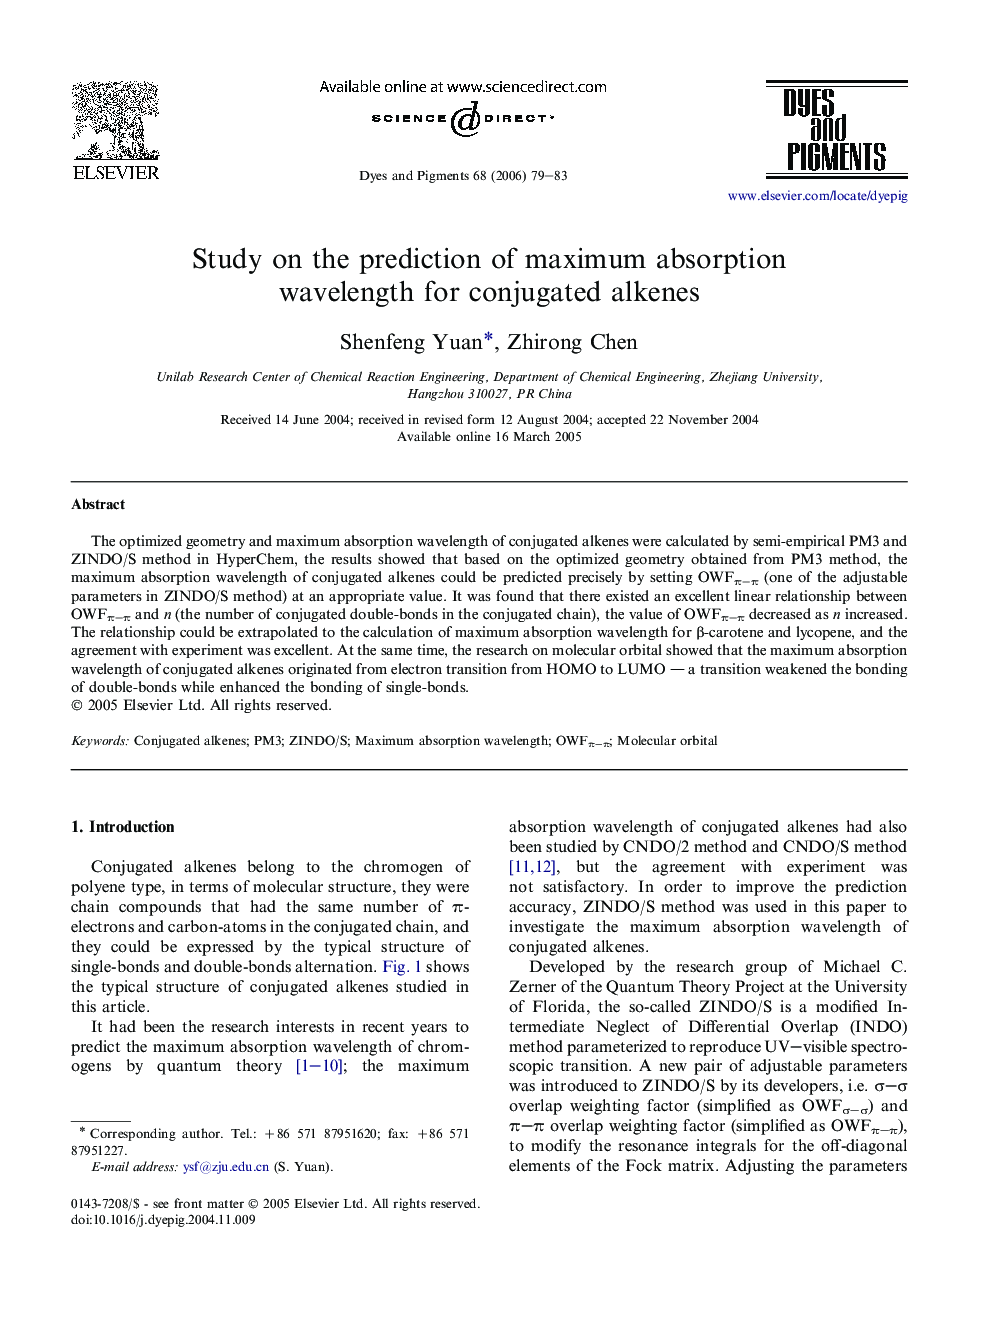 Study on the prediction of maximum absorption wavelength for conjugated alkenes